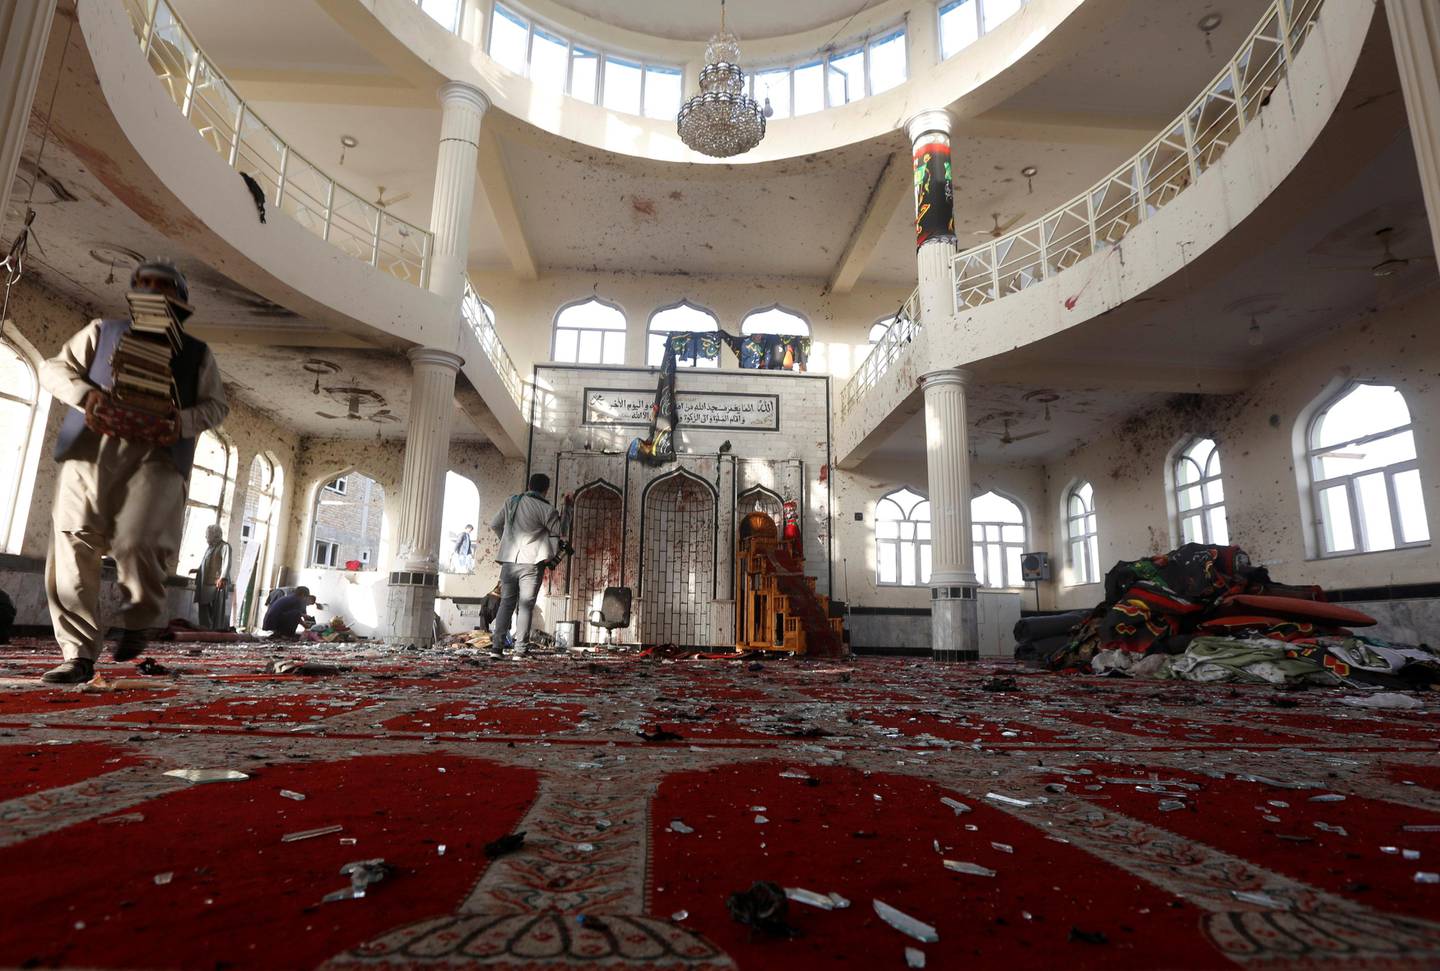 ATTENTION EDITORS - VISUAL COVERAGE OF SCENES OF DEATH AND INJURY Afghan men inspect inside a Shi'ite Muslim mosque after last night's attack in Kabul, Afghanistan October 21, 2017.  REUTERS/Omar Sobhani